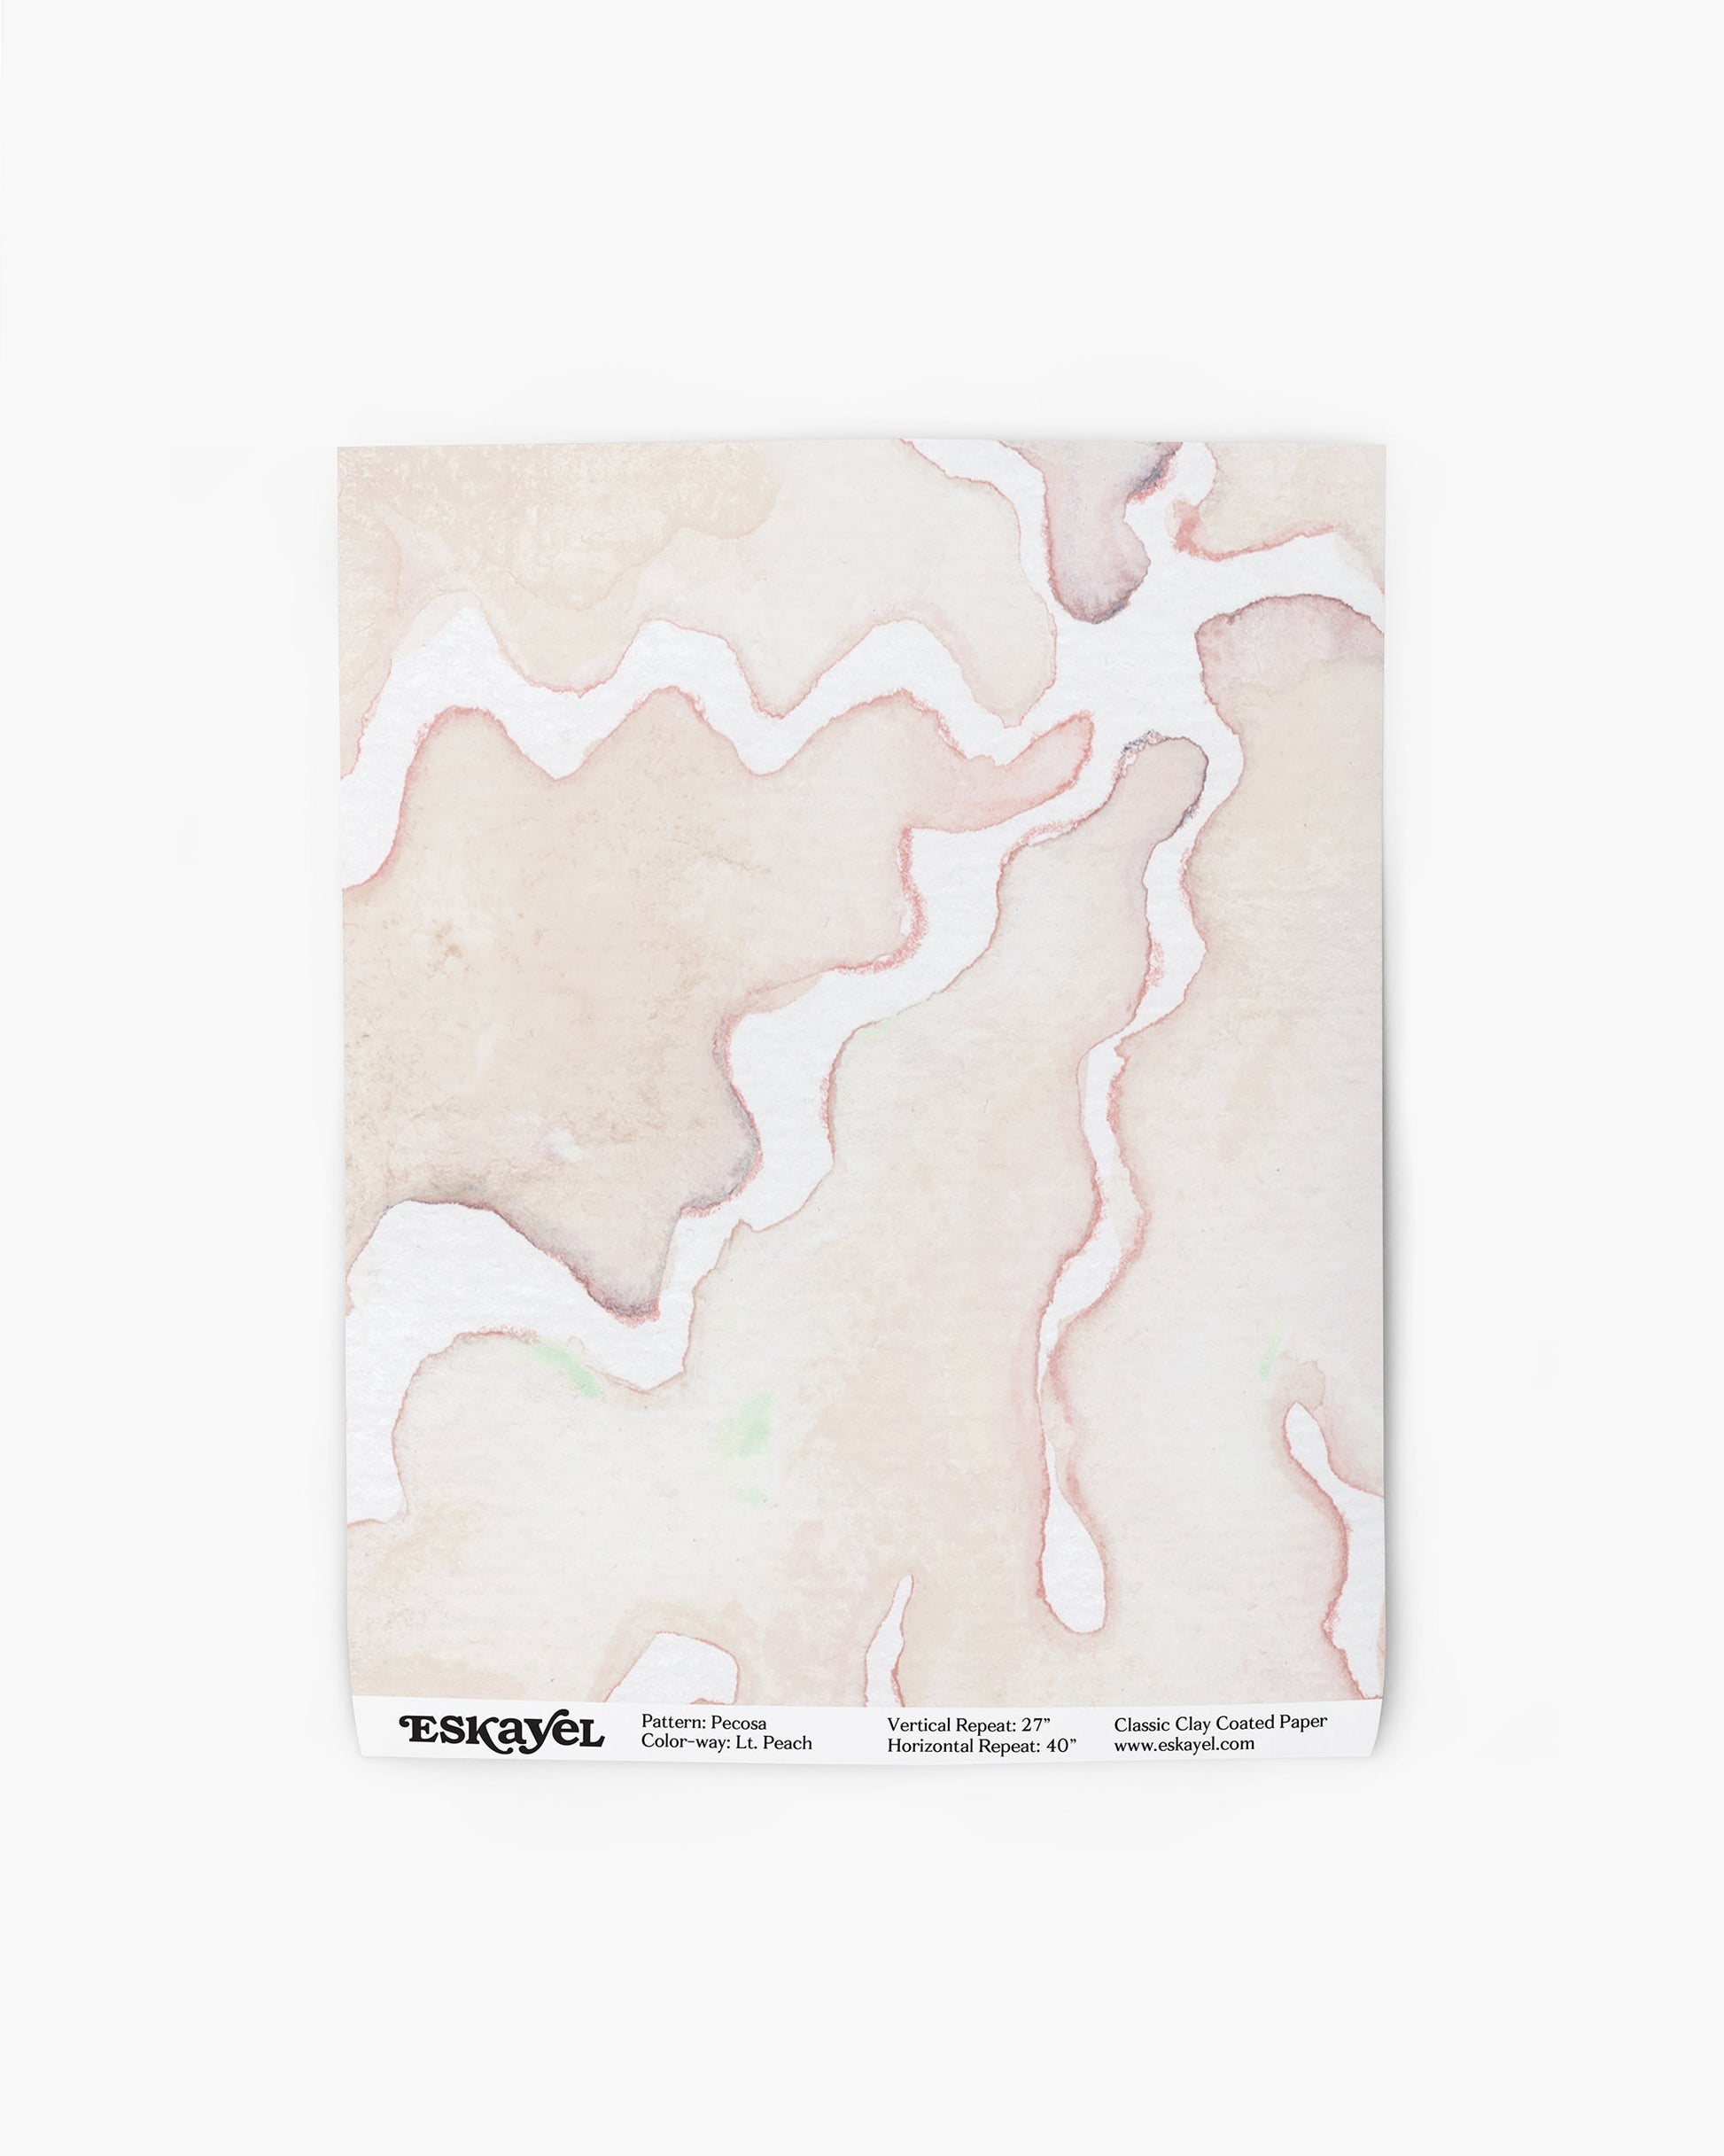 A Pecosa Wallpaper Sample Light Peach on wallpaper is available on wallpaper